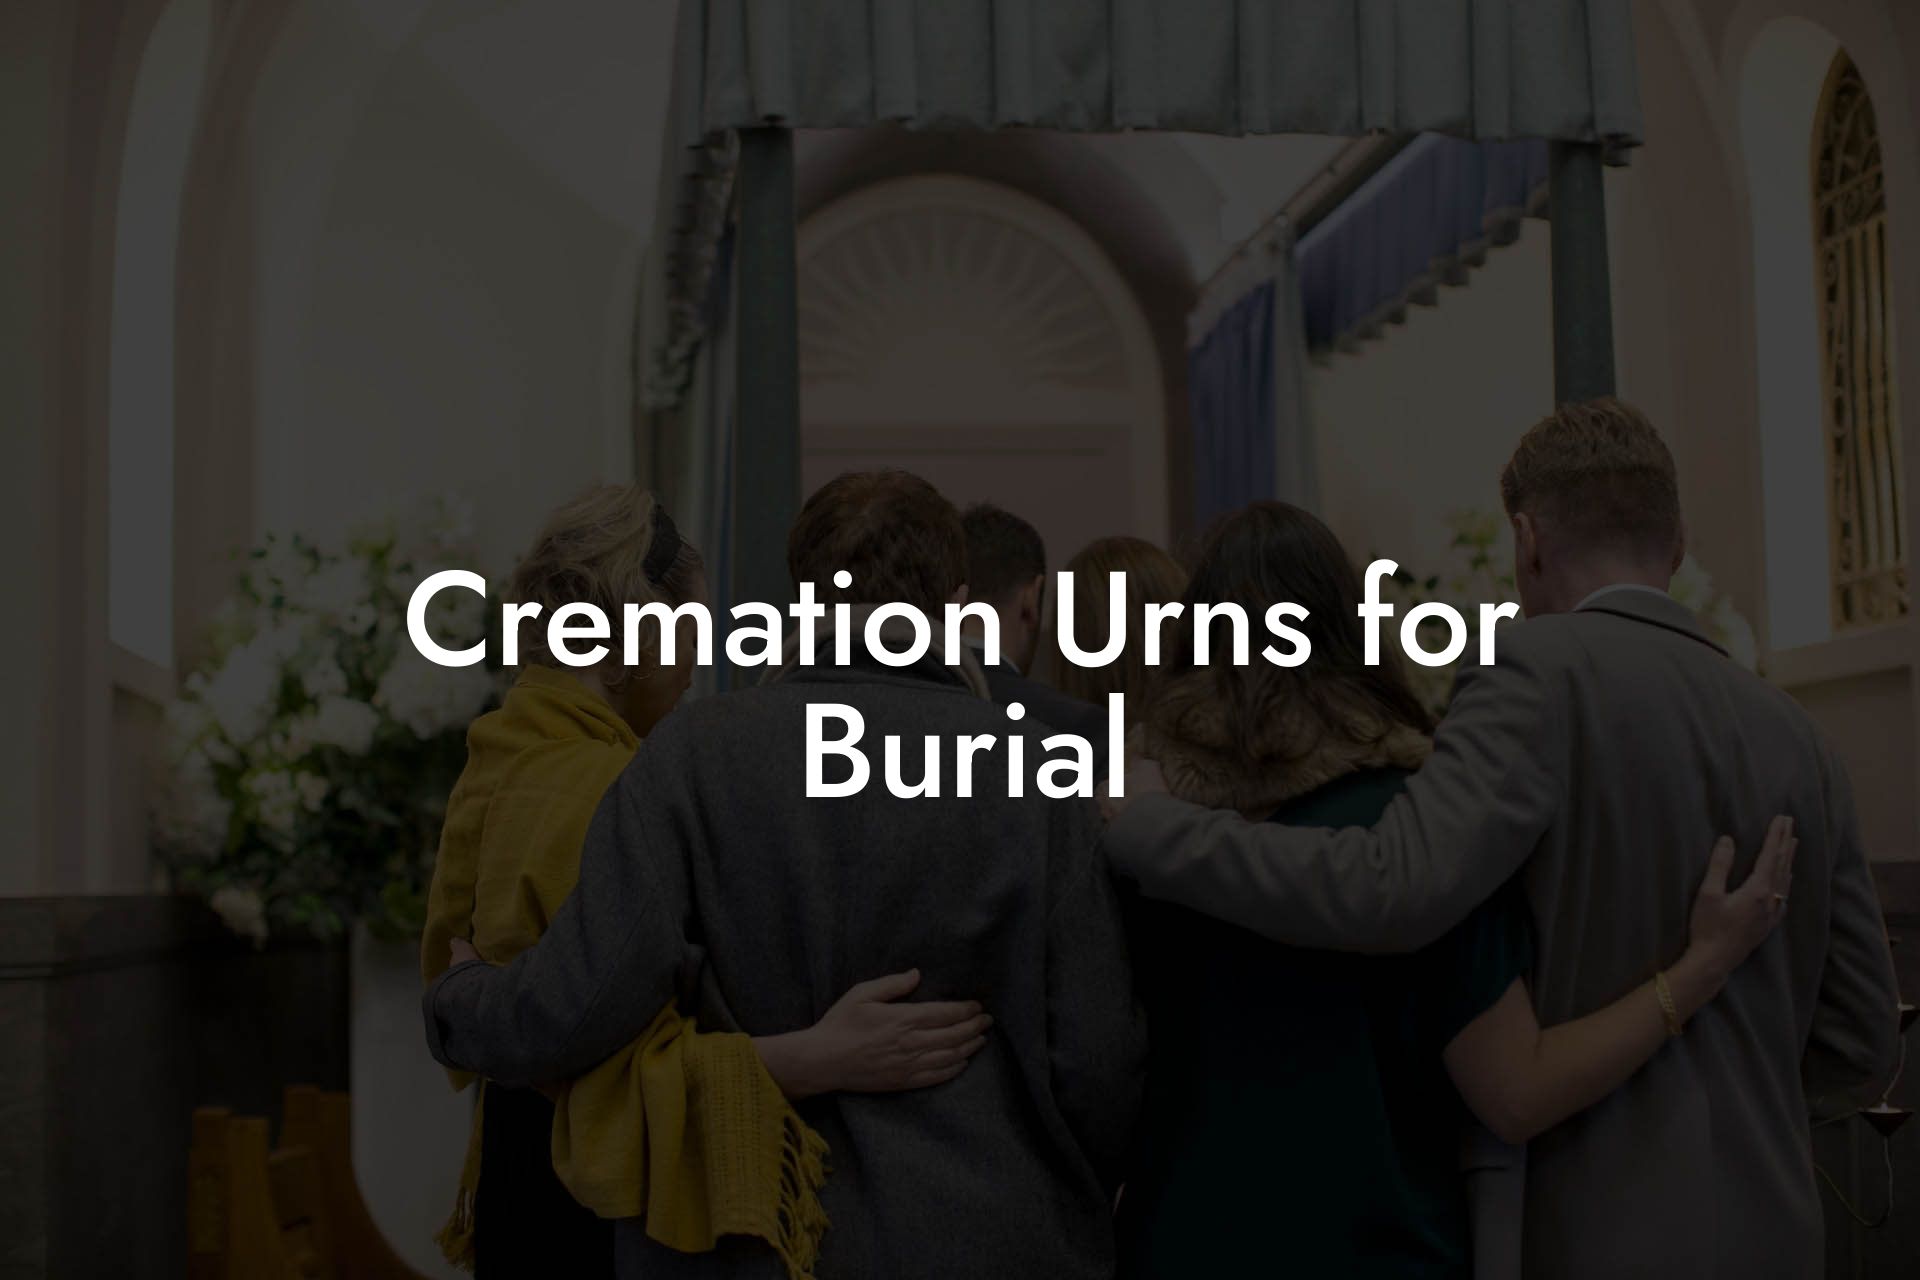 Cremation Urns for Burial